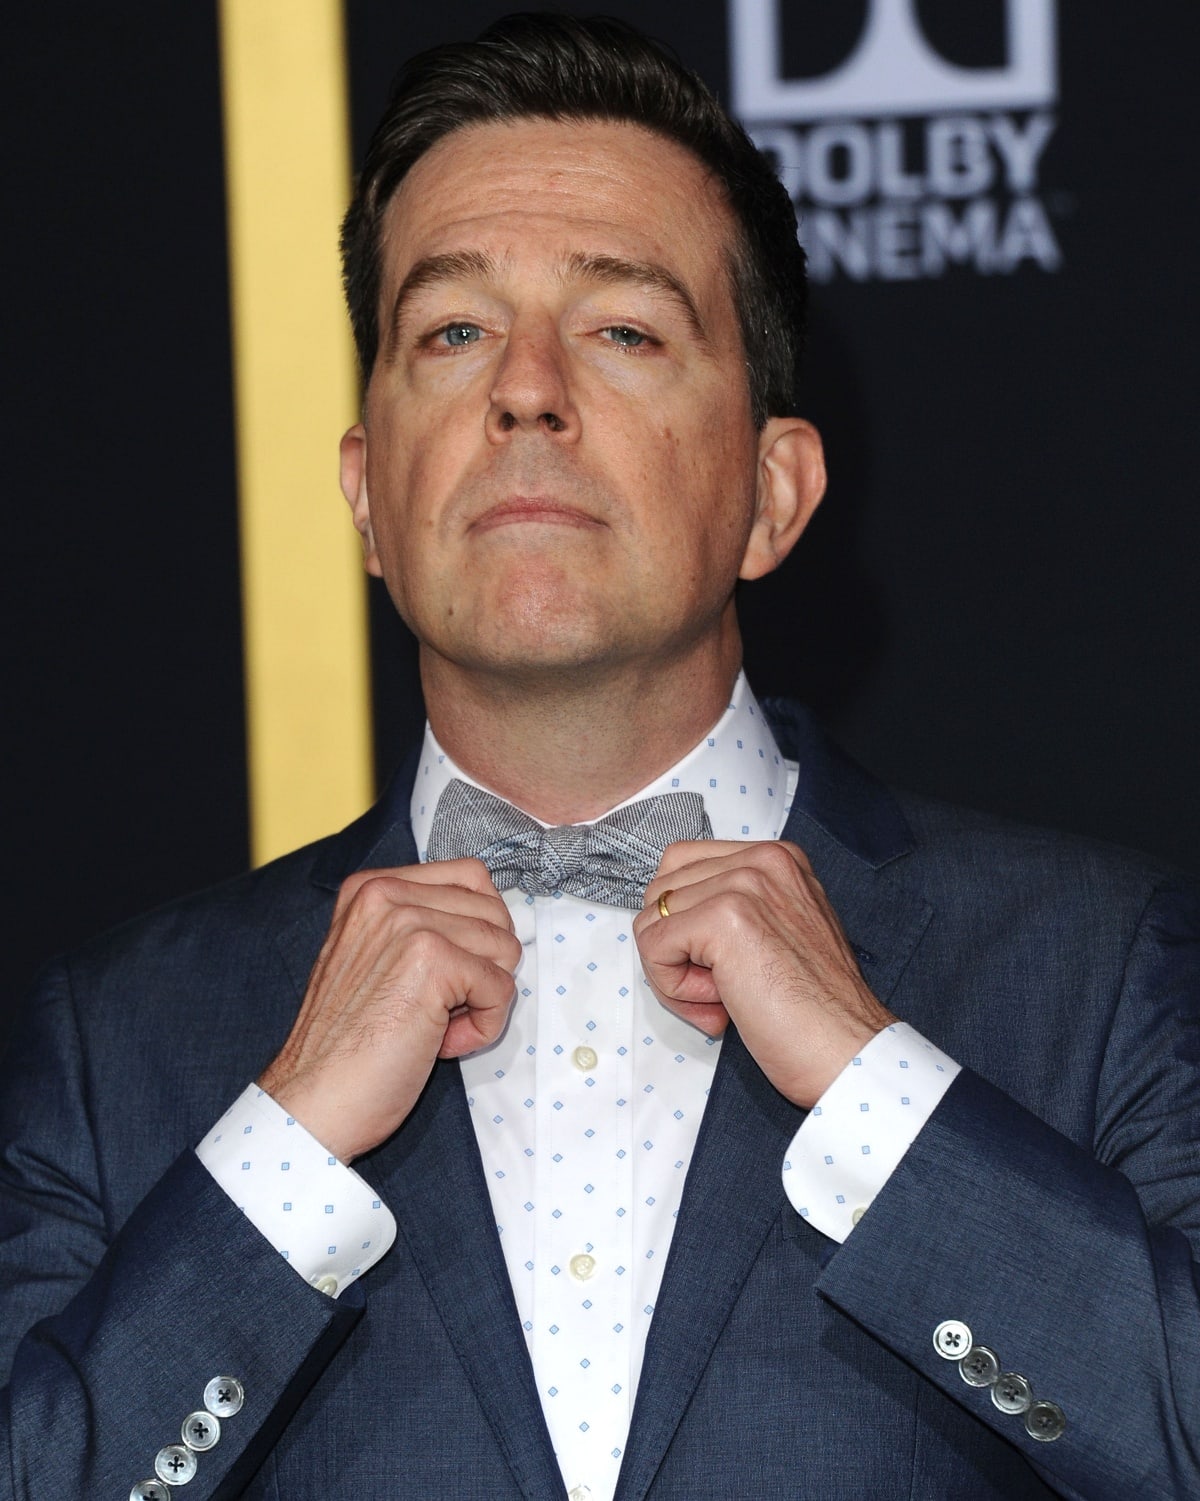 Ed Helms at the premiere of A Star Is Born